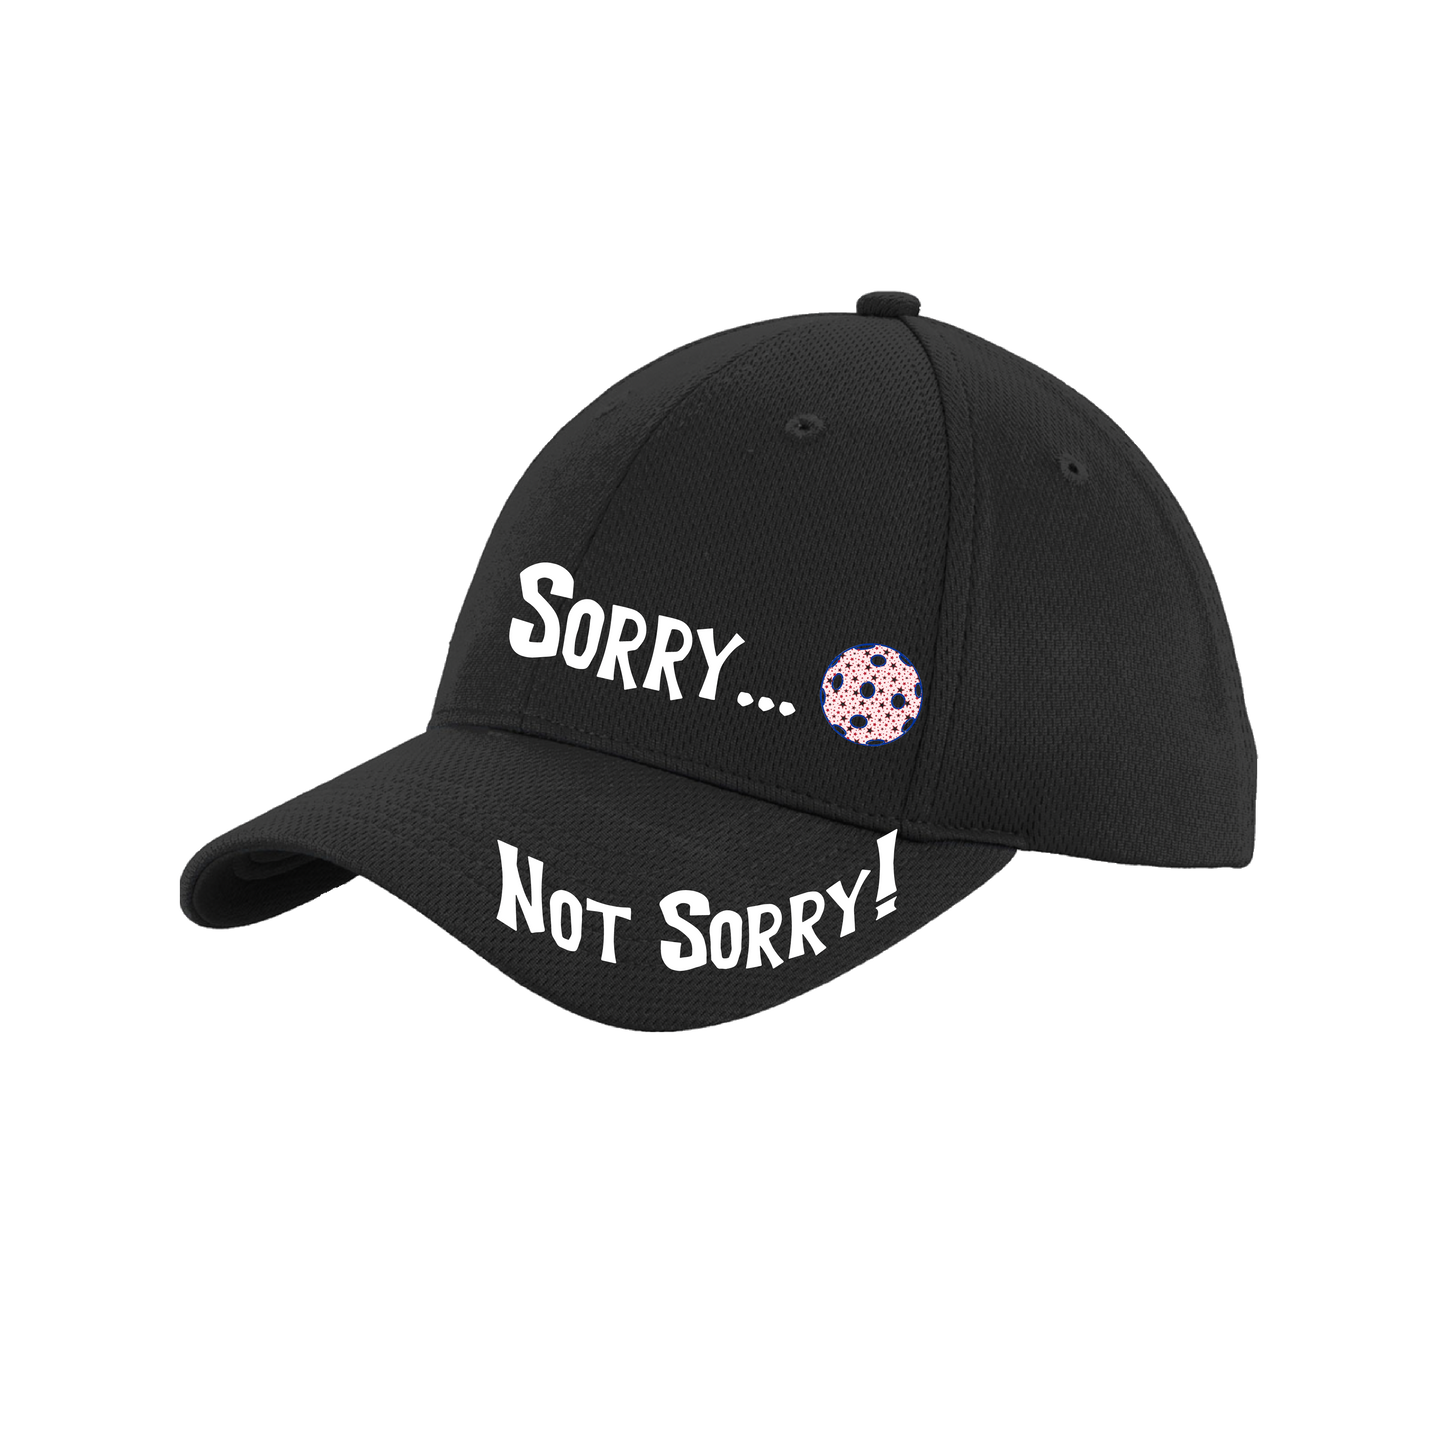 Sorry Not Sorry With Pickleball (Customizable) | Pickleball Hat | Moisture-Wicking 100% Polyester